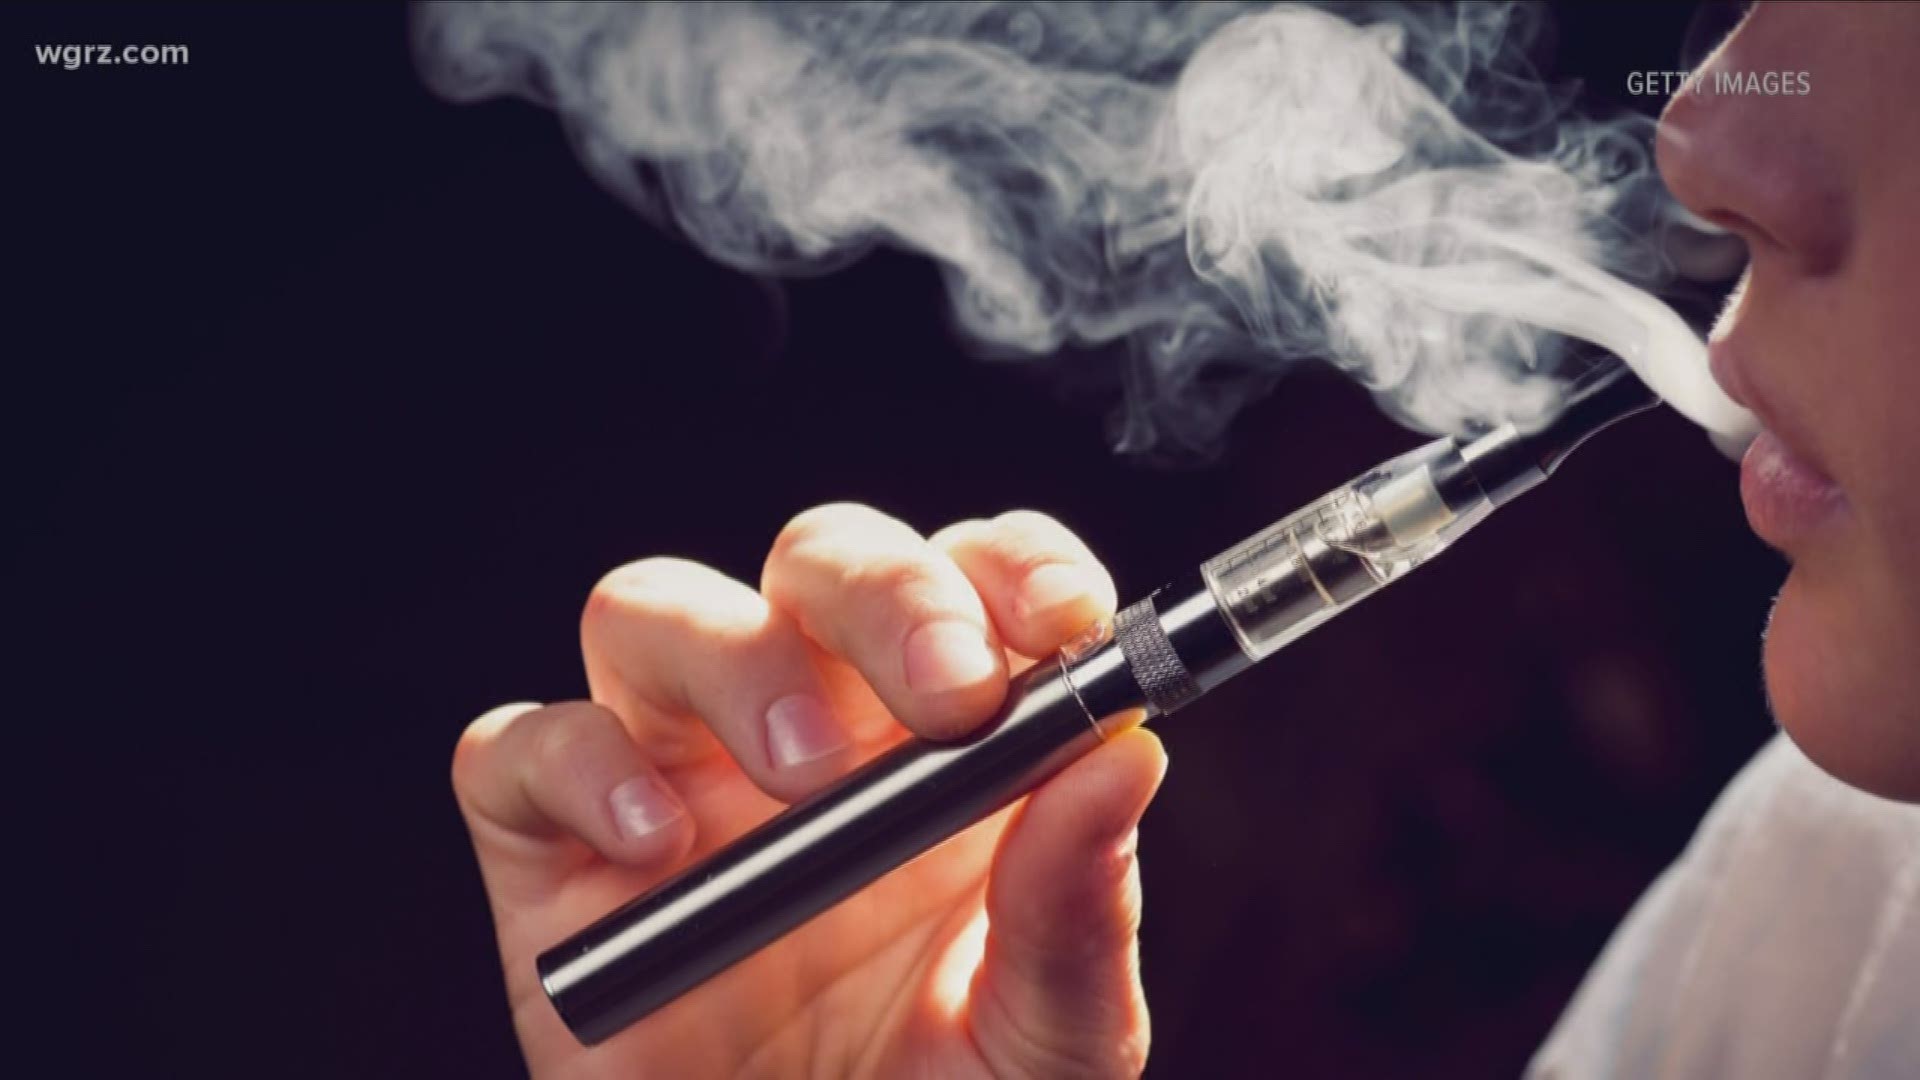 FDA Ban On Flavored Vaping Products In Effect